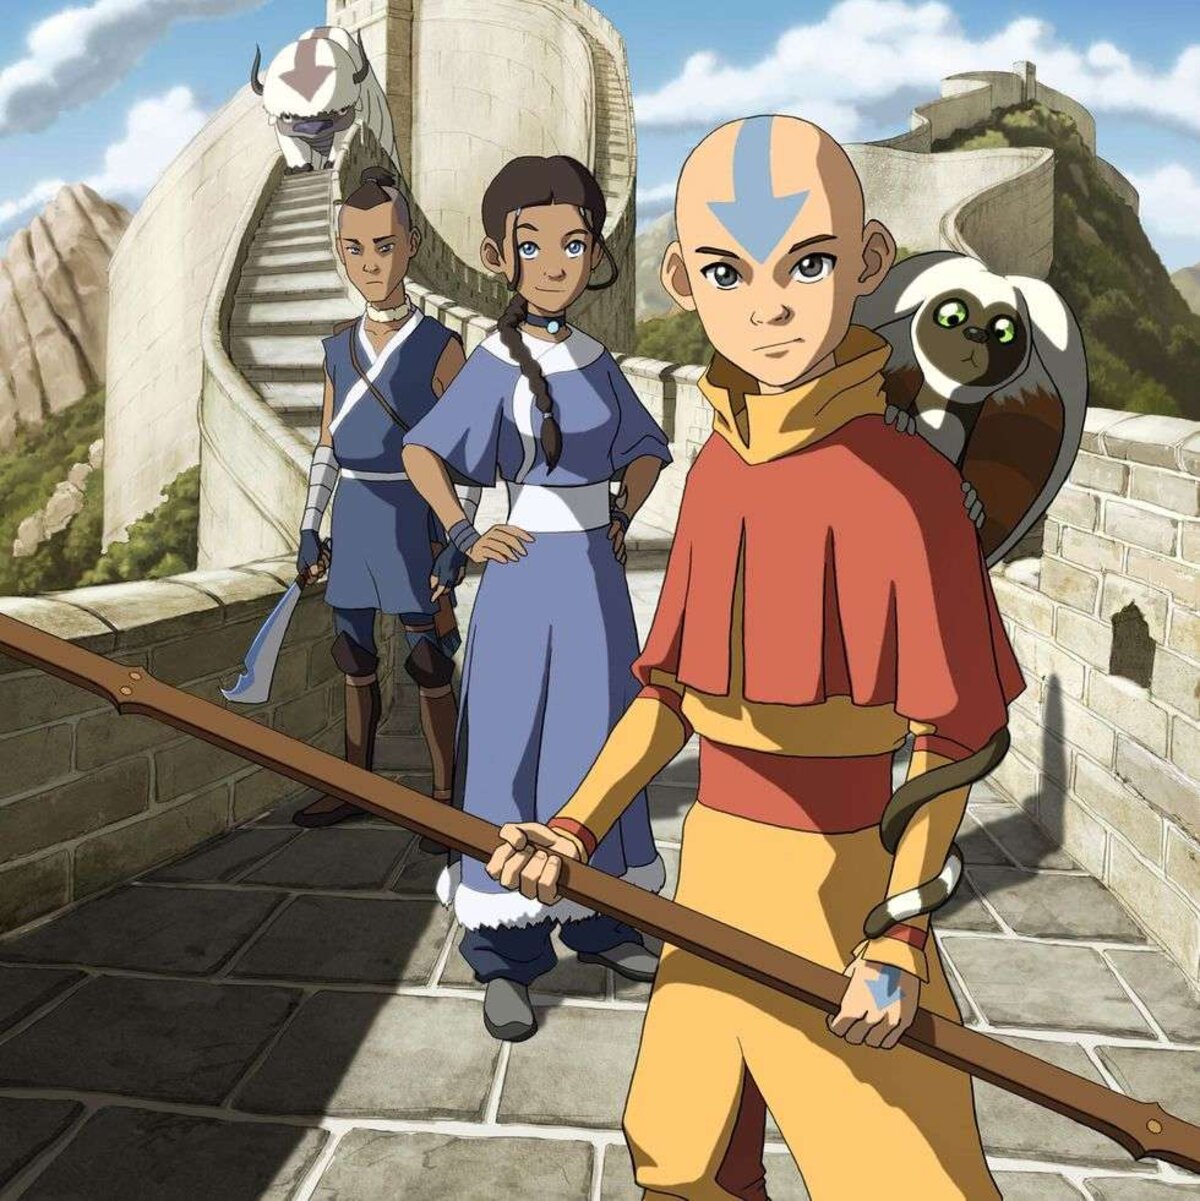 Avatar: The Last Airbender: creators discuss if it's anime or not | SYFY  WIRE